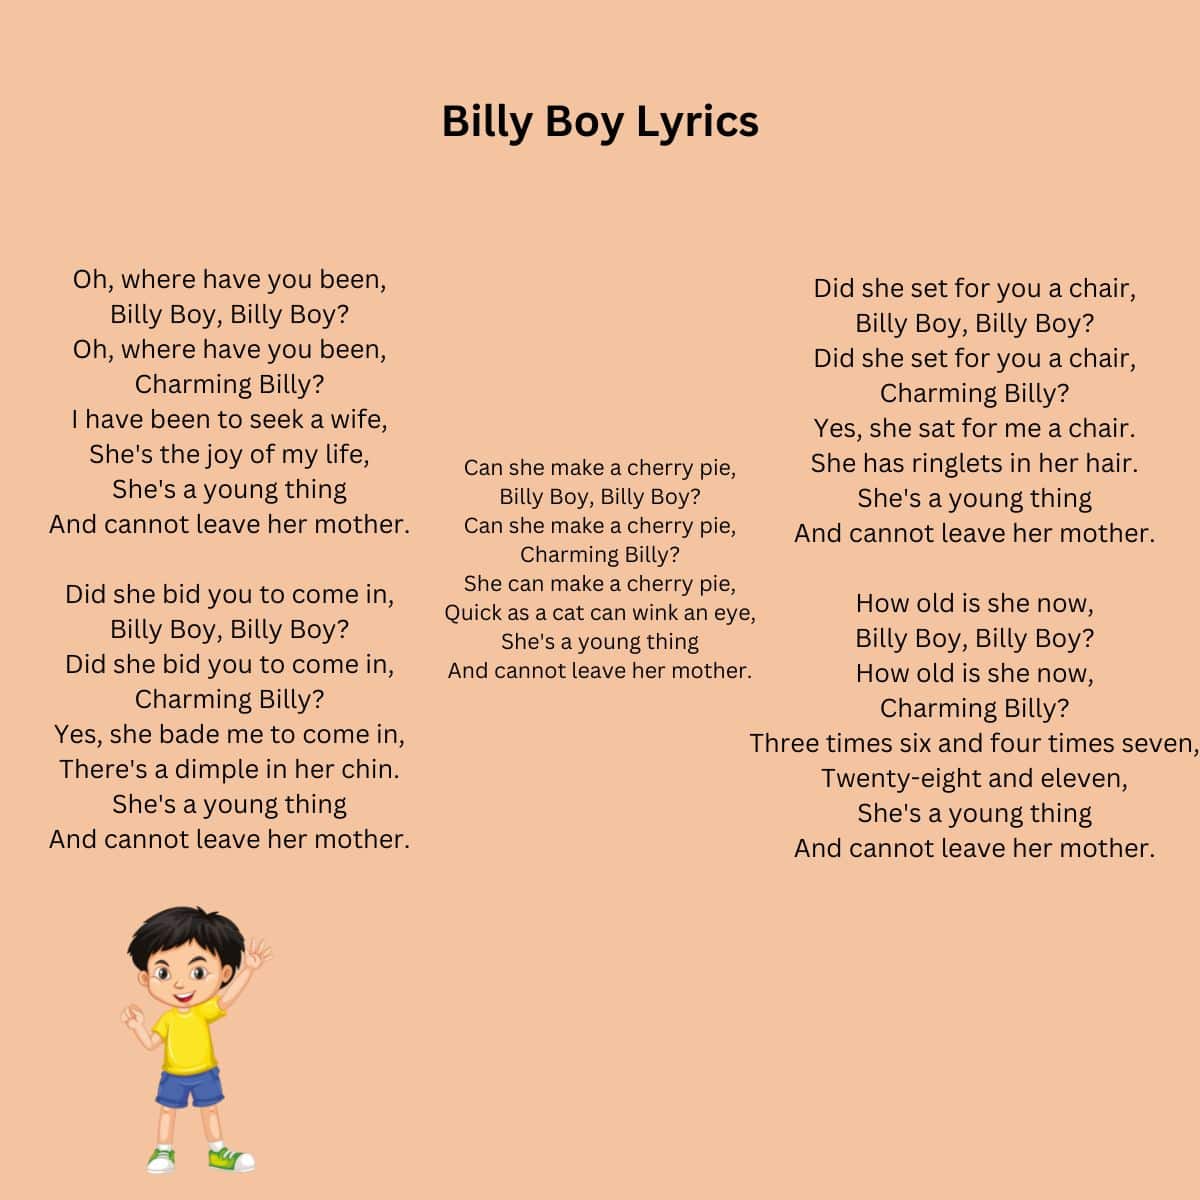 Billy Boy Lyrics with a boy in the picture